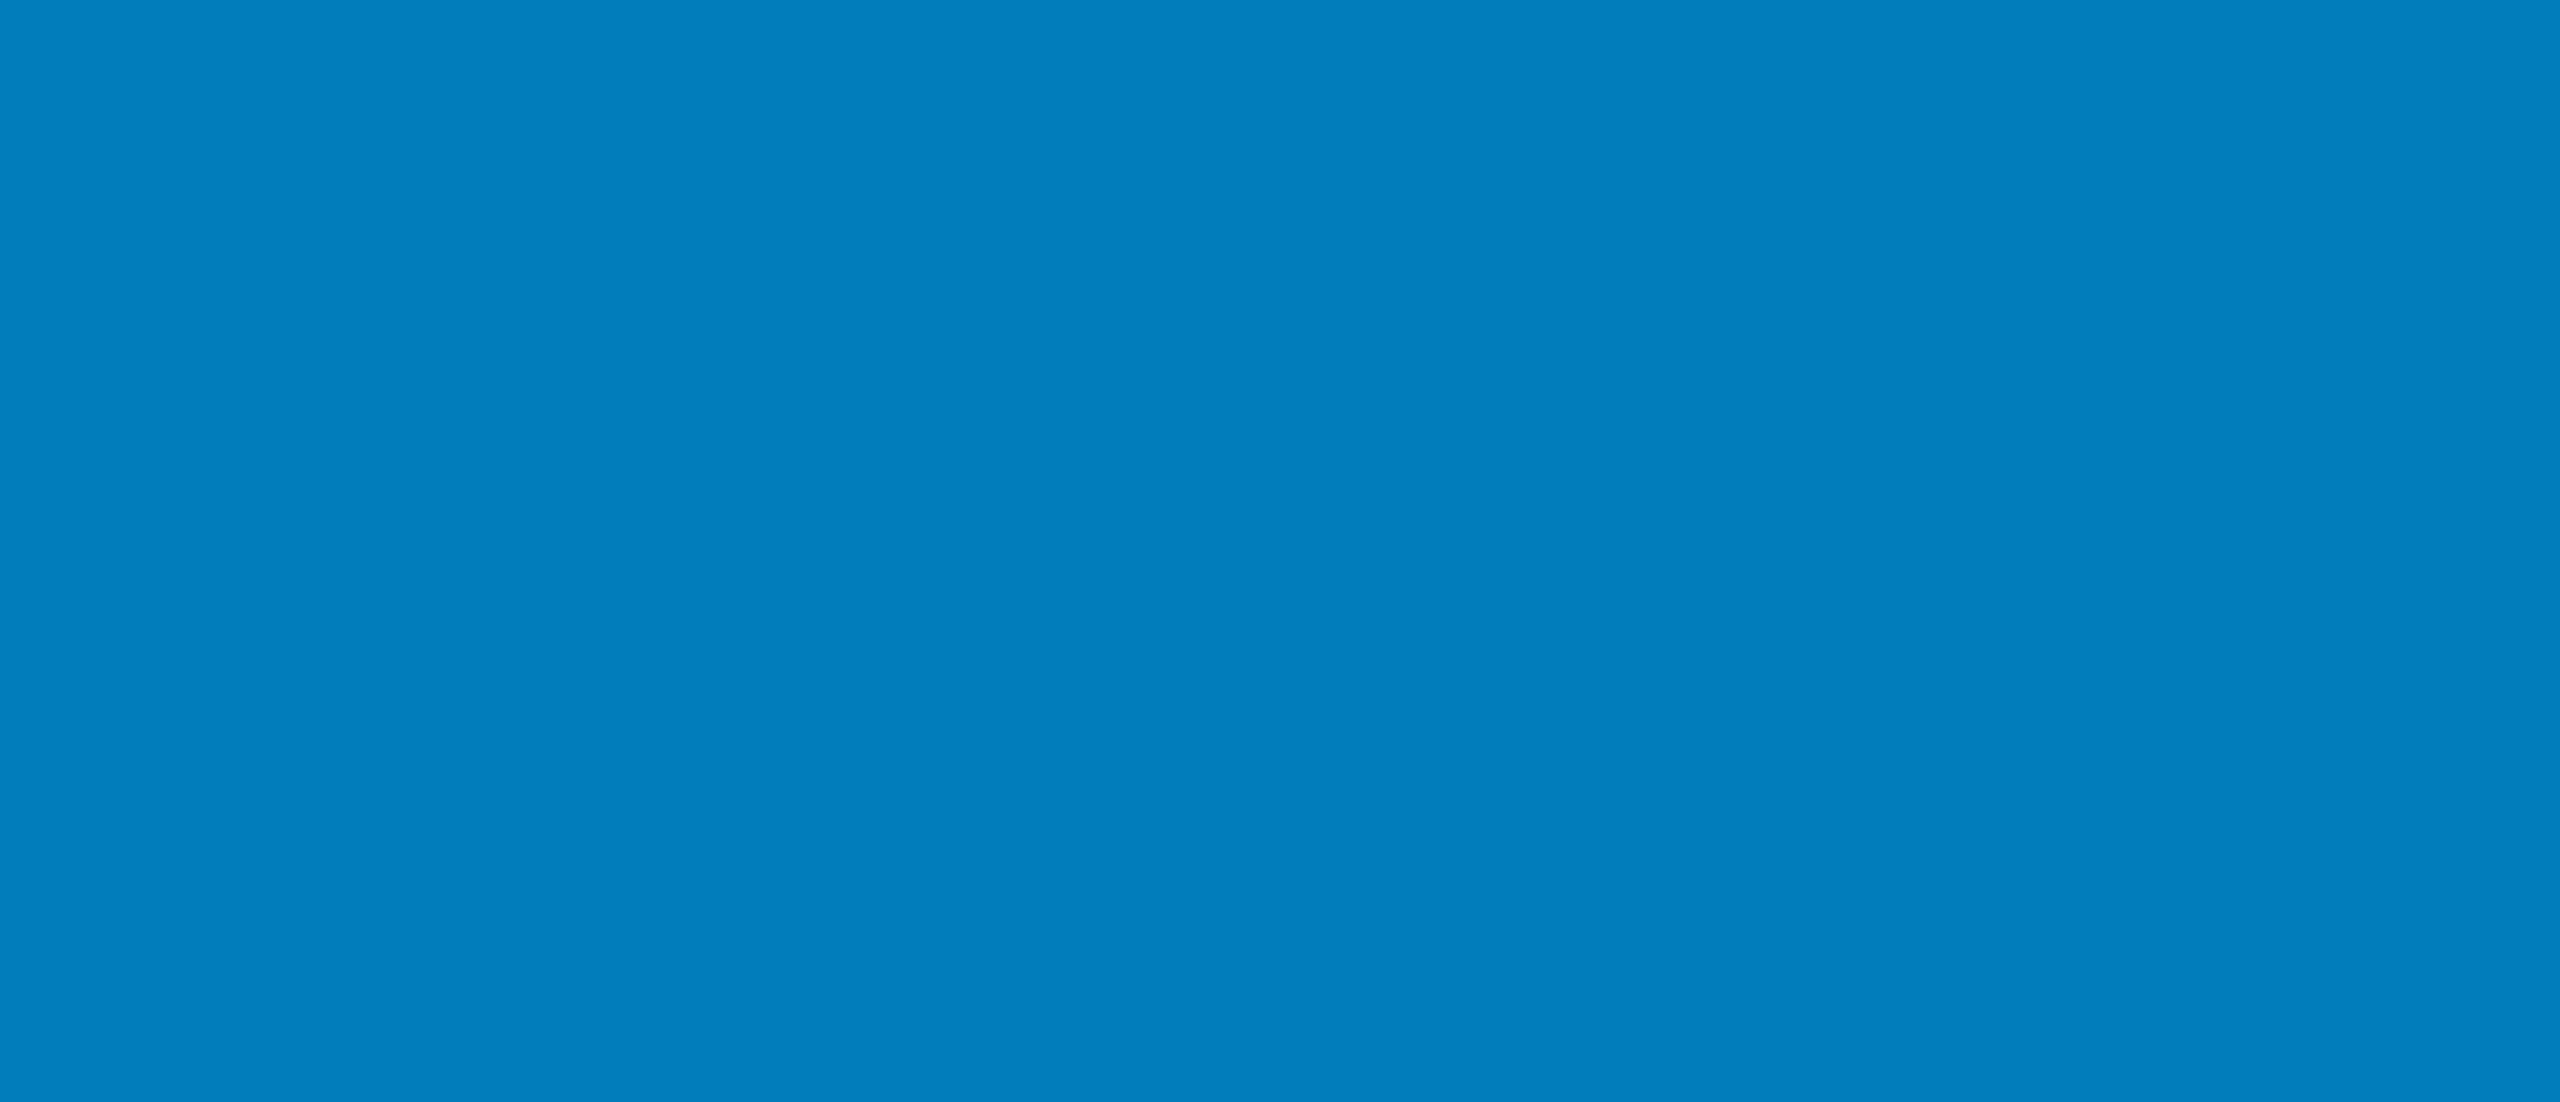 image of a blue footer background color